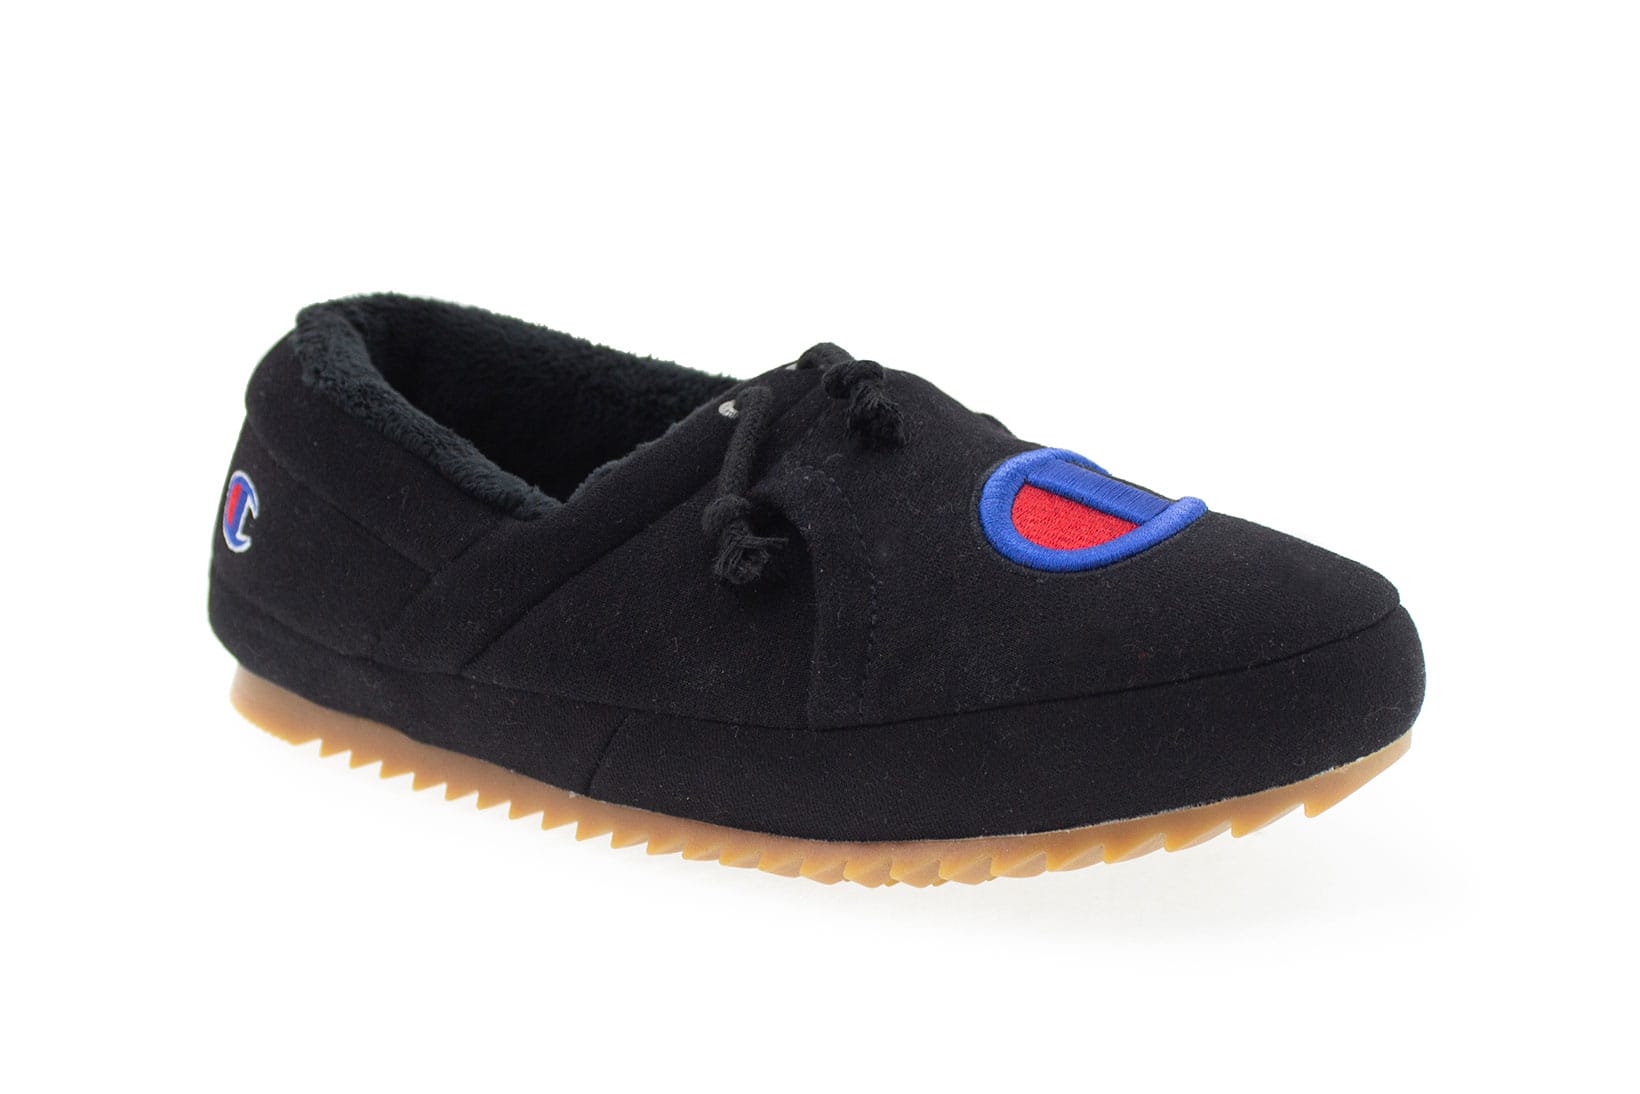 champion slippers on sale